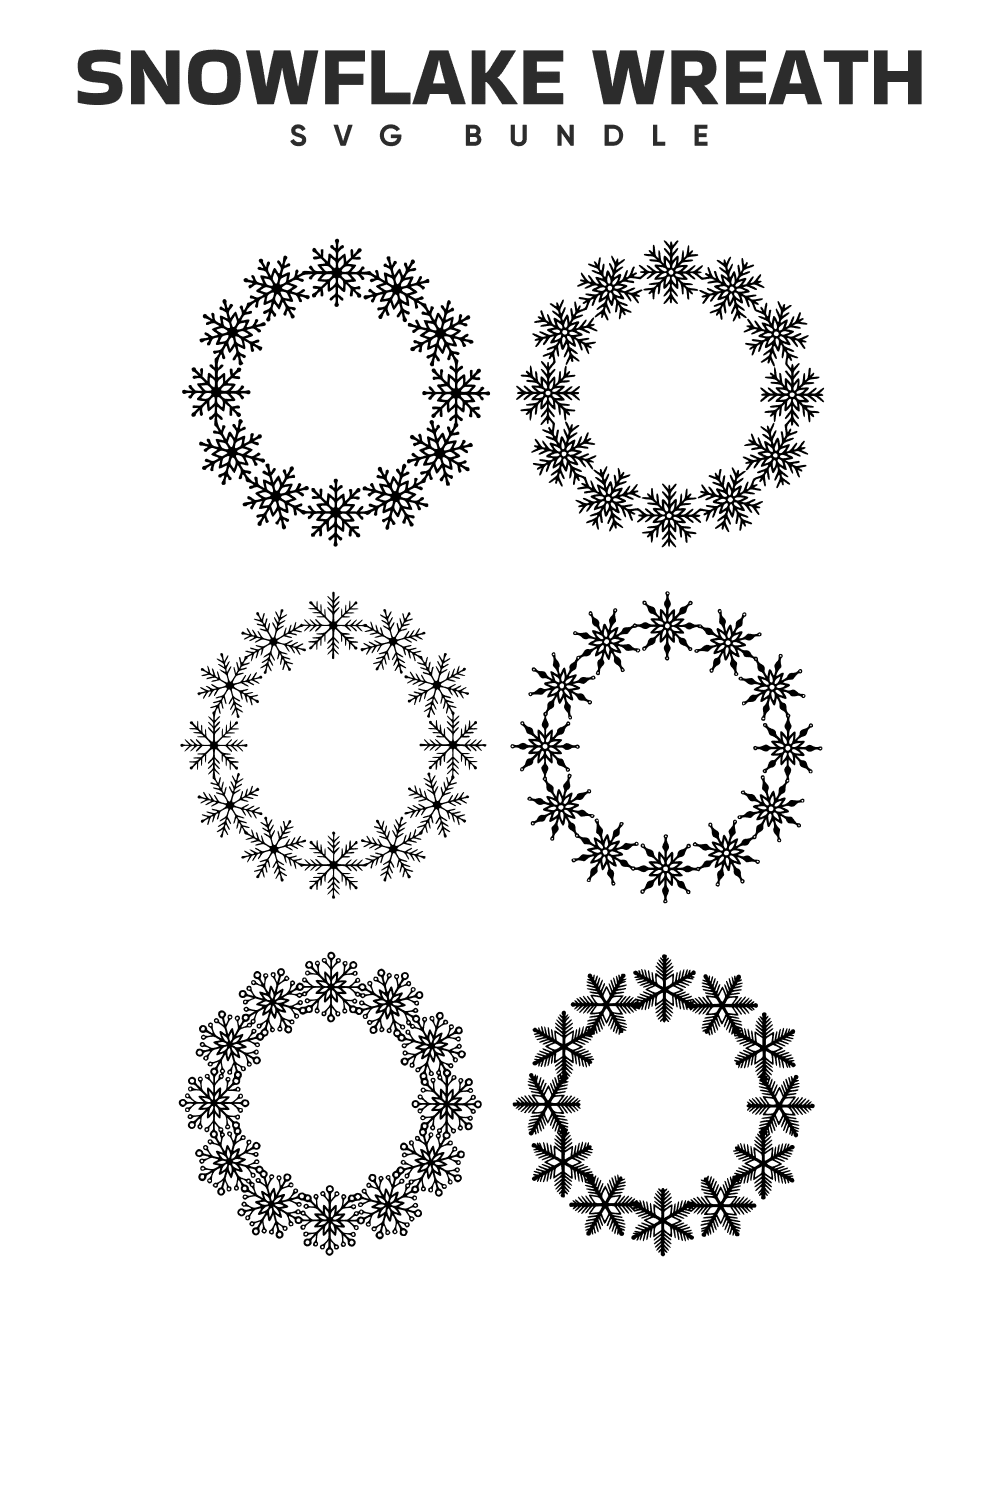 Snowflake Wreath SVG - pinterest image preview.